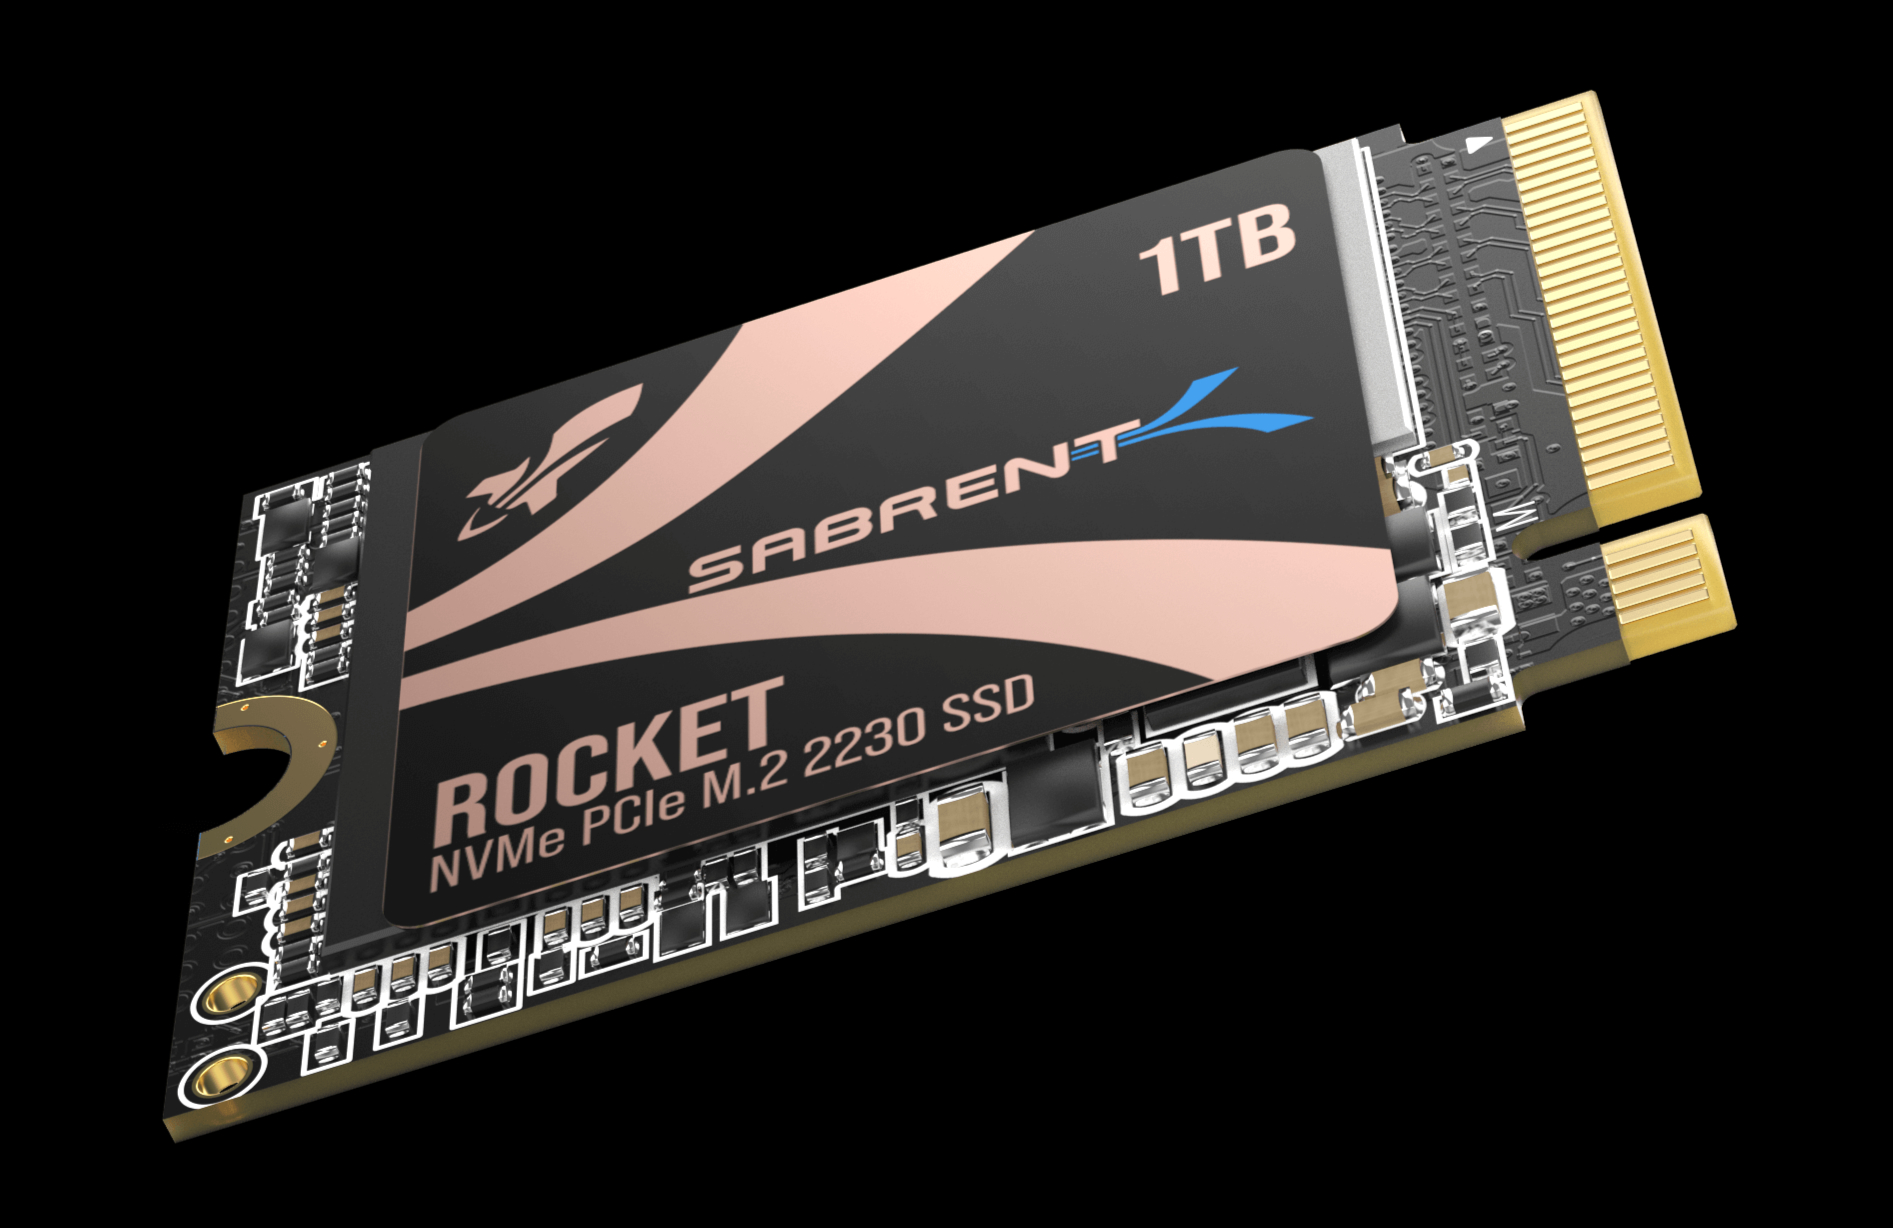 Sabrent Rocket 2230: A Small Form Factor NVMe SSD with Impressive